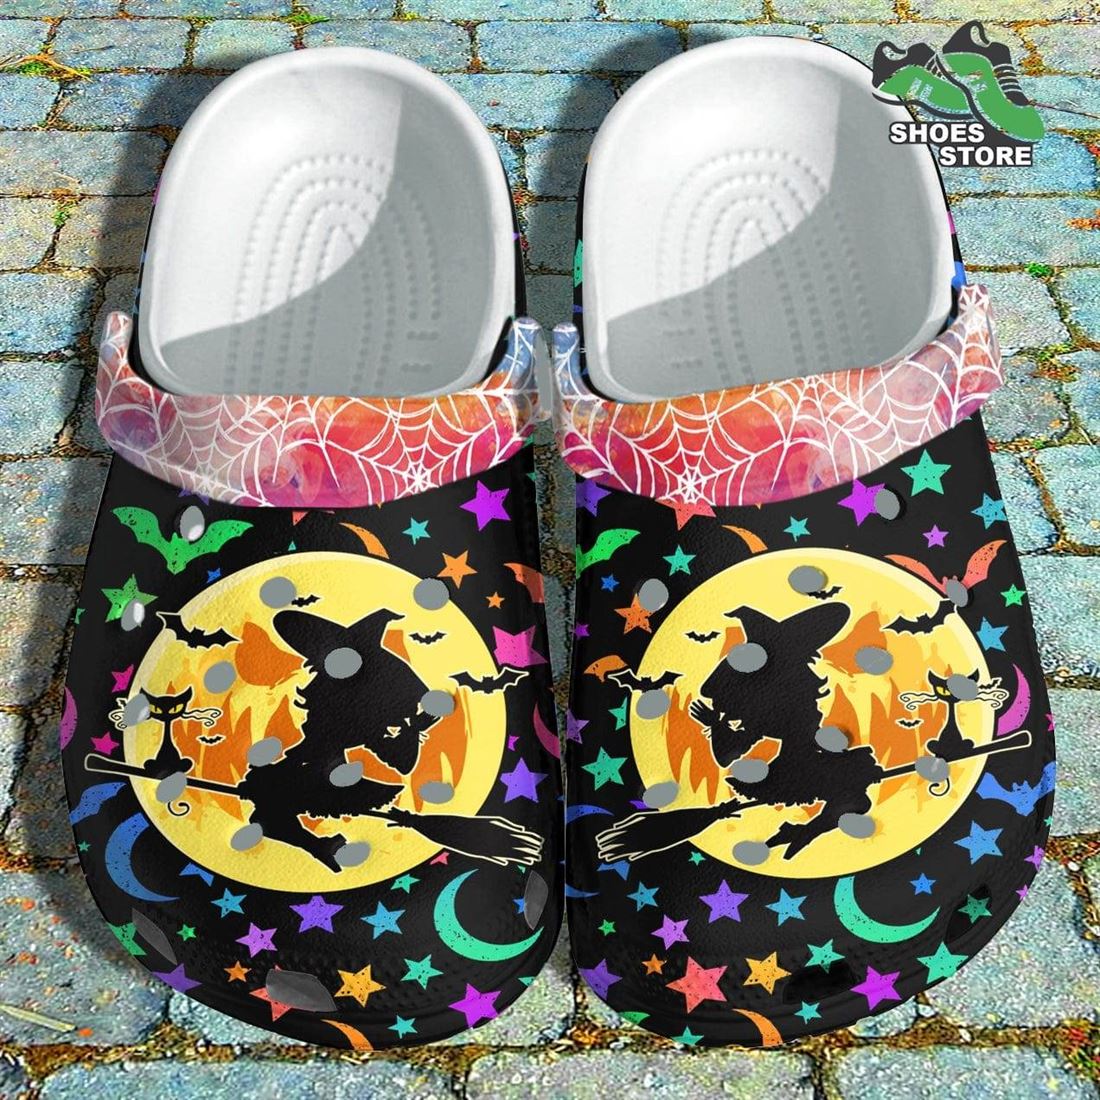 Dream Night Witch Crocs Shoes Star Moon Crocs Shoes Gifts Christmas